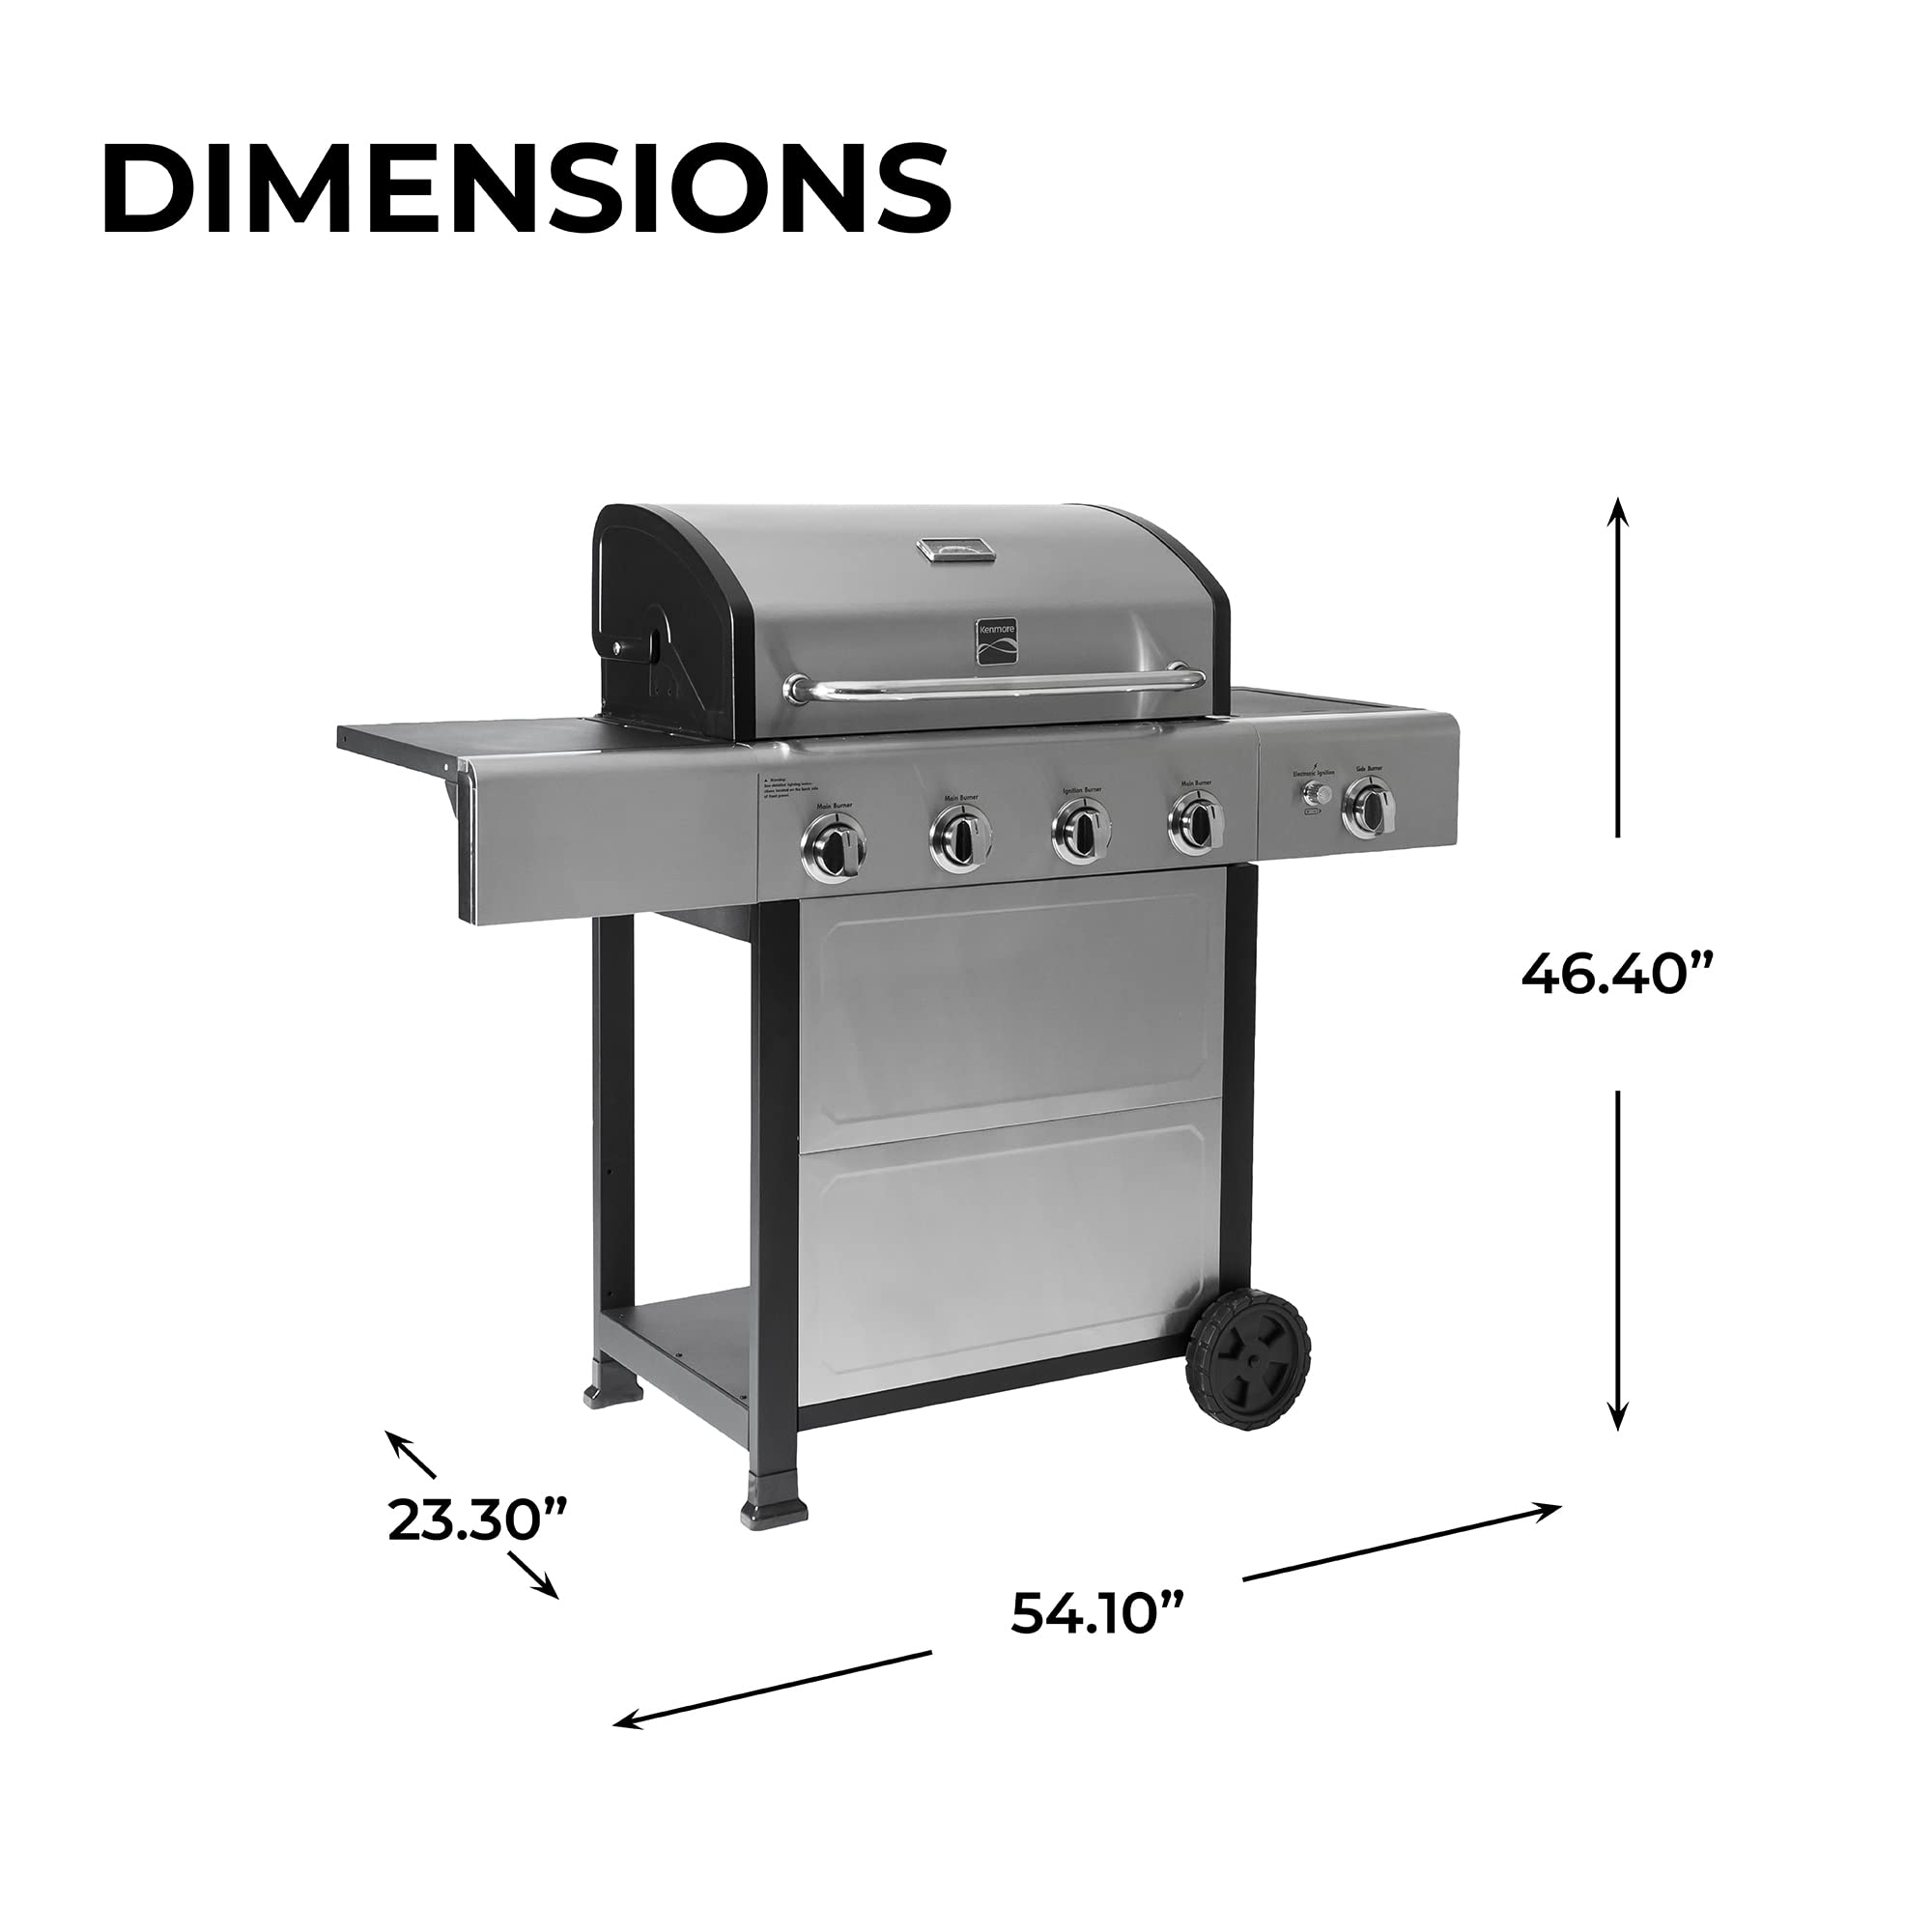 Kenmore 4-Burner Gas Grill with Side Burner, Outdoor BBQ Grill, Propane Gas Grill, Cast Iron Cooking Grates, Electronic Ignition, Warming Rack, Open Cart Design, 53000 BTUs, Stainless Steel